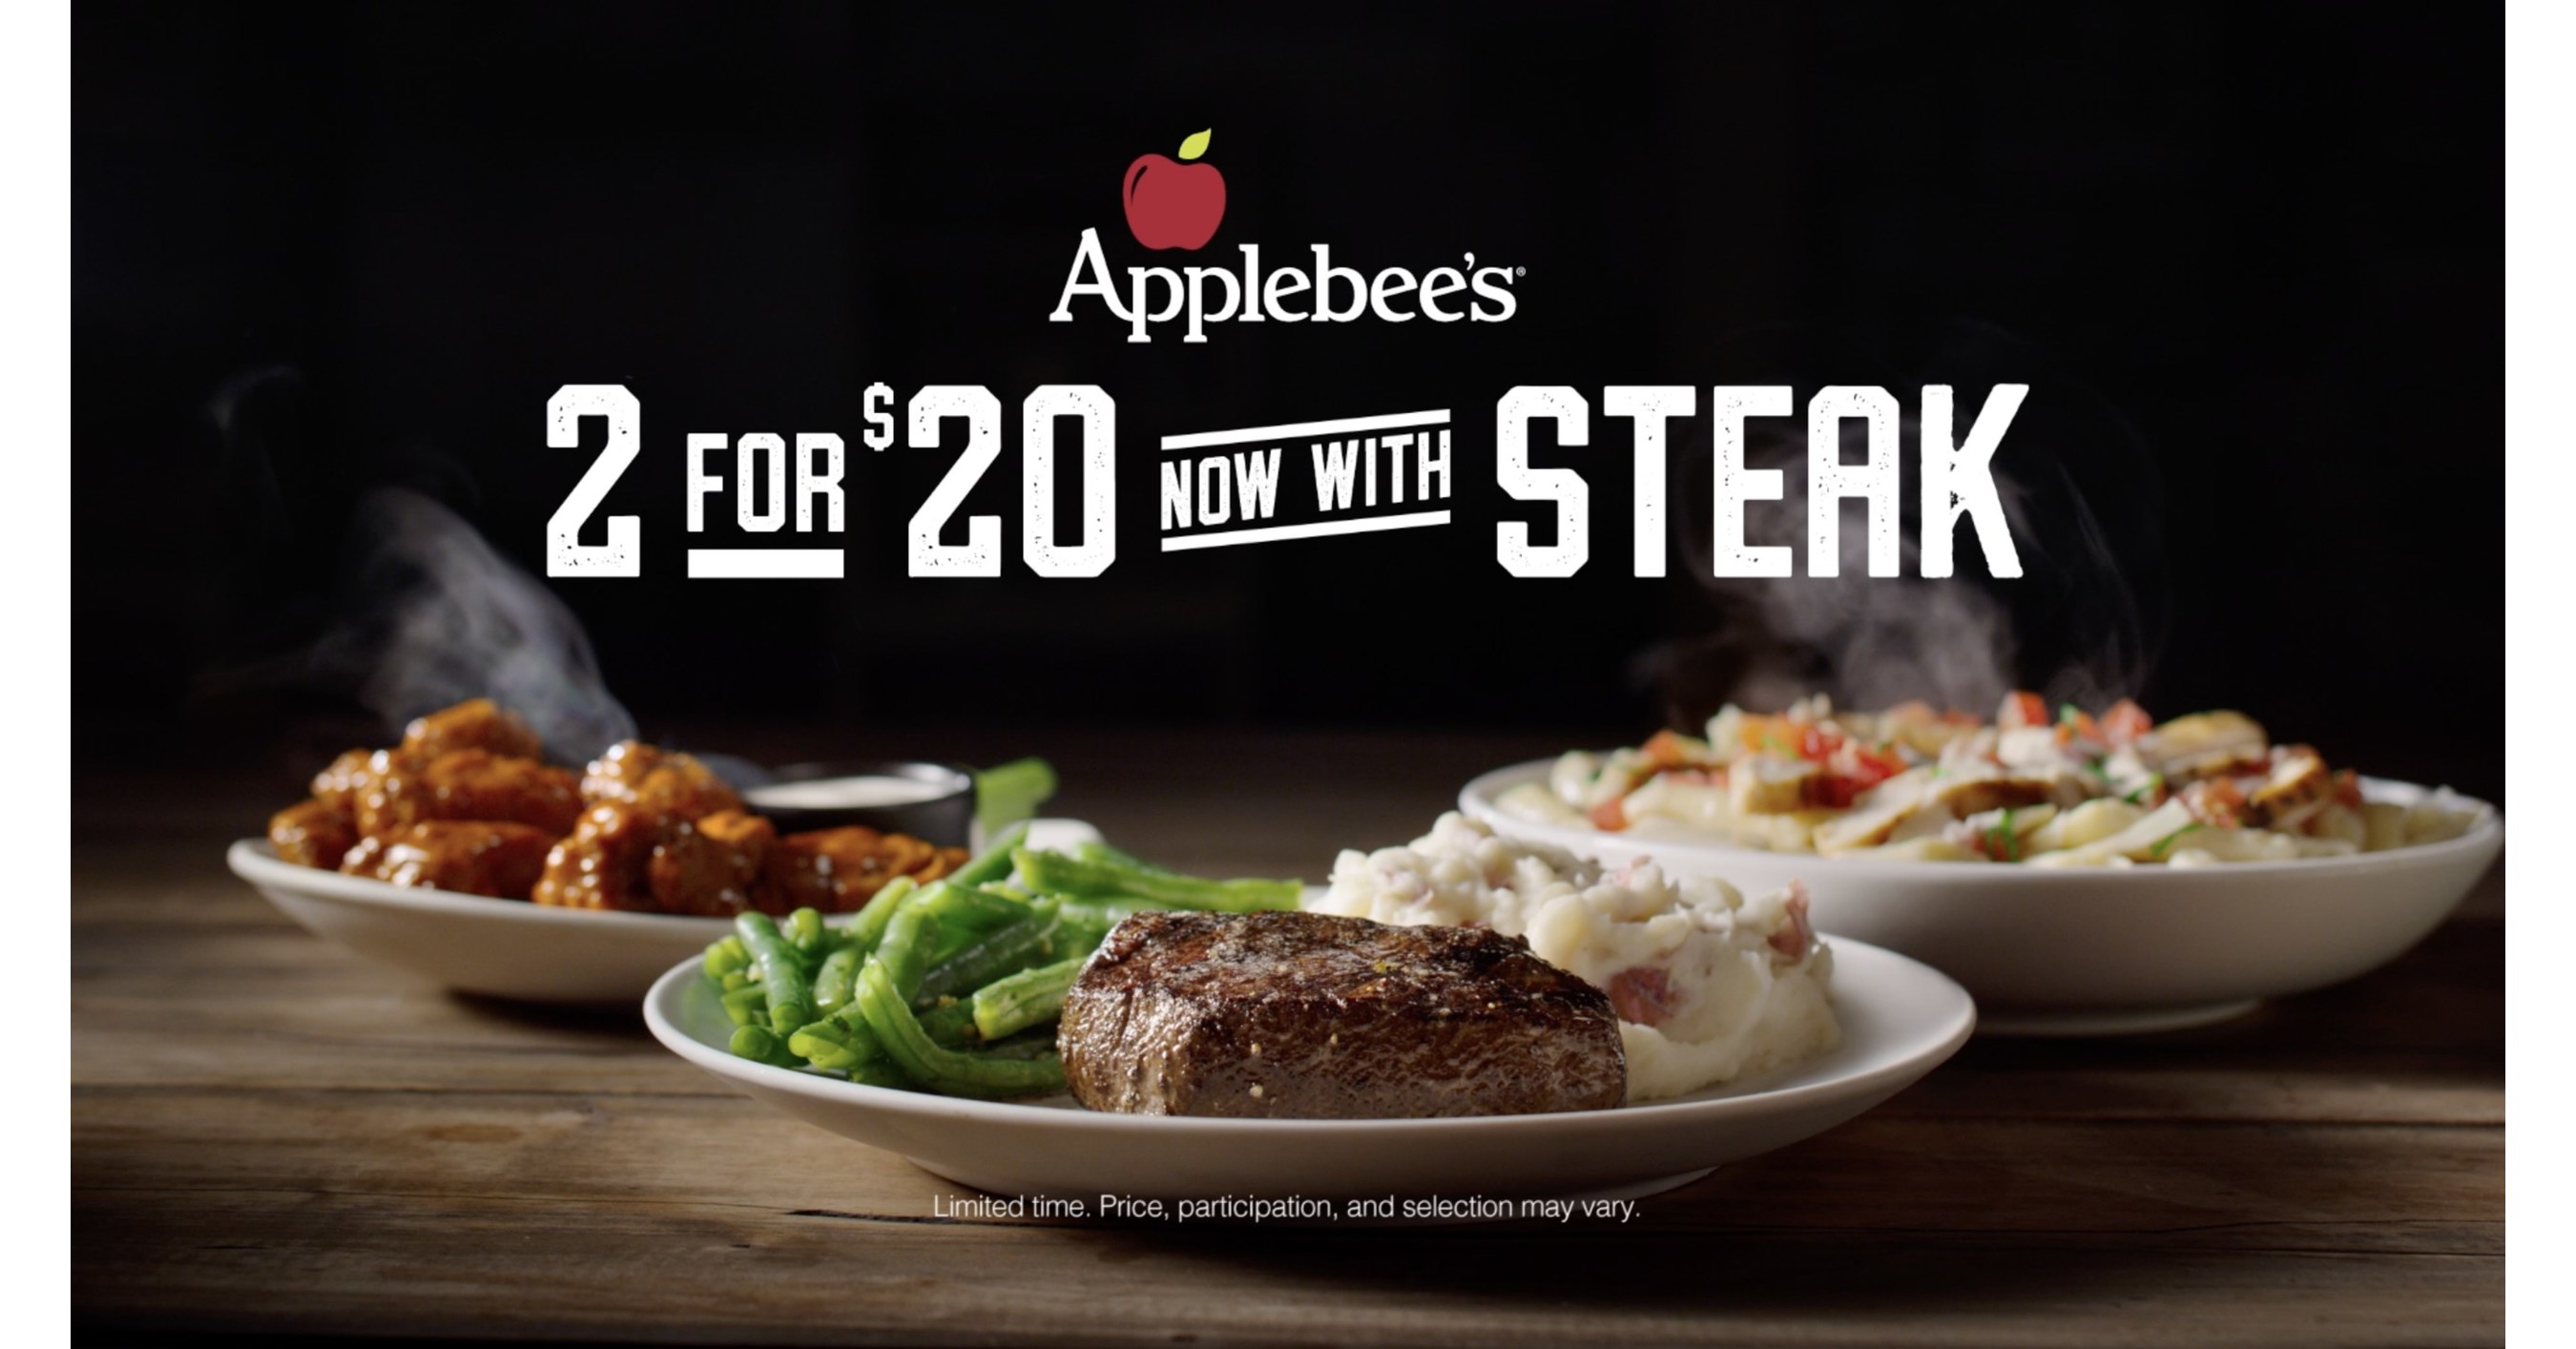 Applebee's® Conquers Cravings by Bringing Steak Back to Its Signature 2